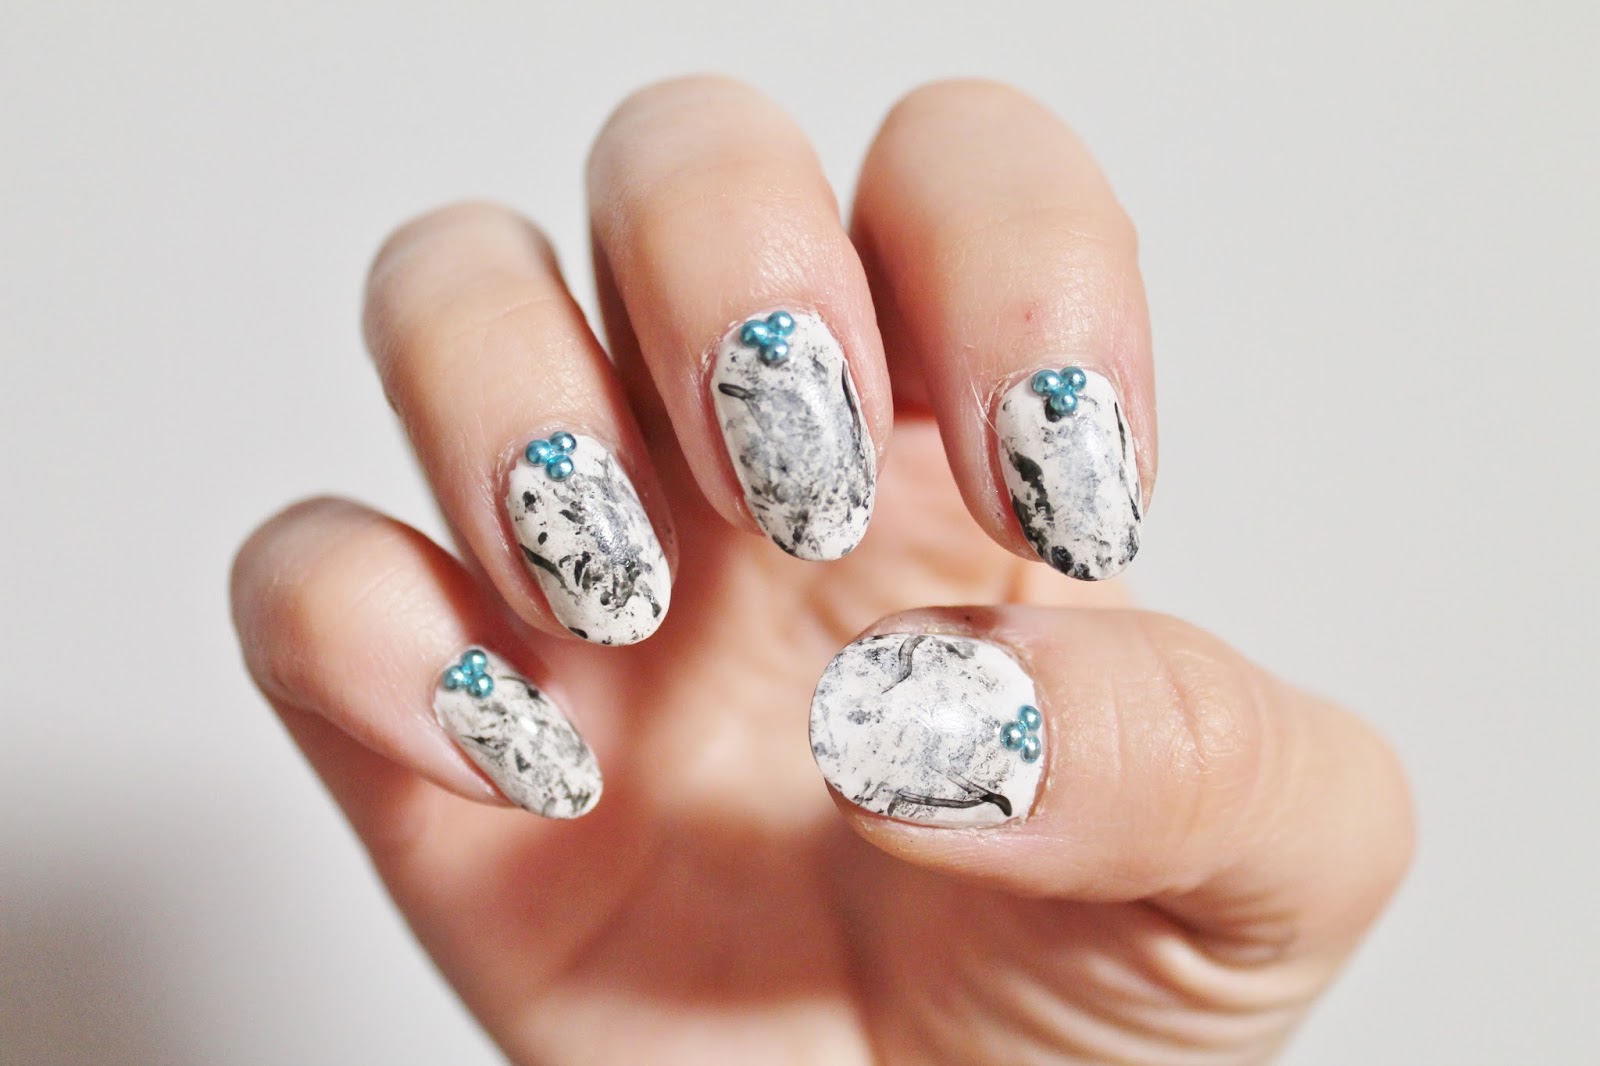 5. How to Create a Marble Nail Effect with Gel Polish - wide 2